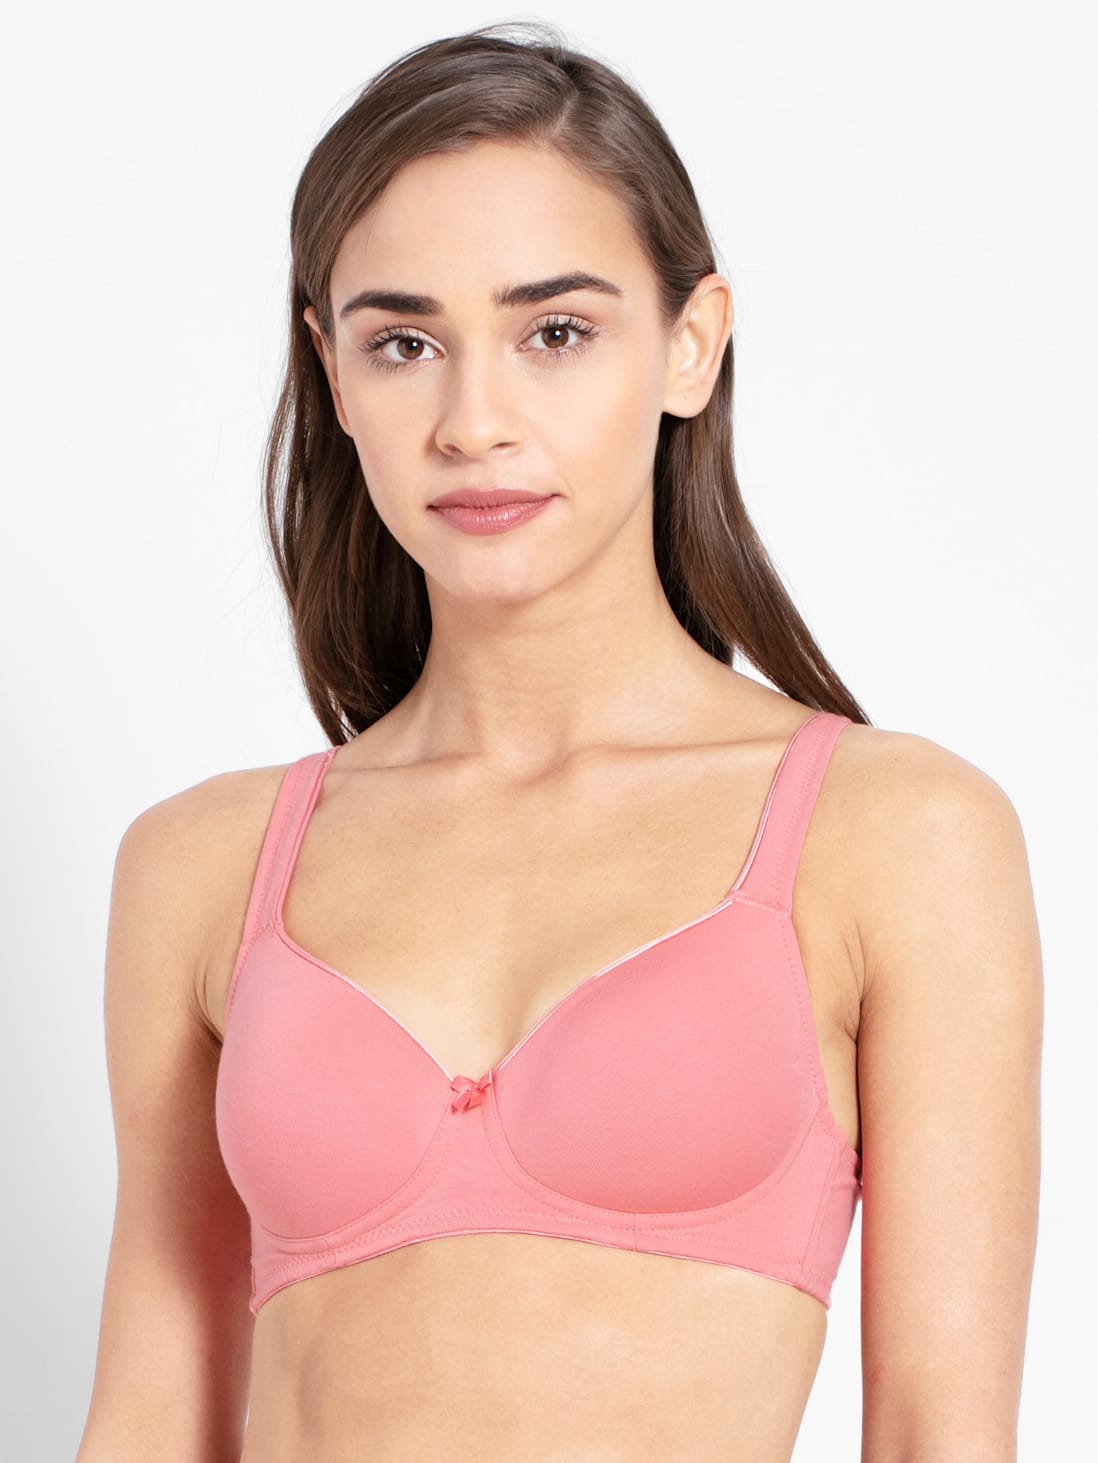 https://static05.jockey.in/c_scale,h_1463,w_1098/jockey/uploads/dealimages/9368/originalimages/peach-blossom-non-wired-full-coverage-t-shirt-bra-fe35-13.jpg